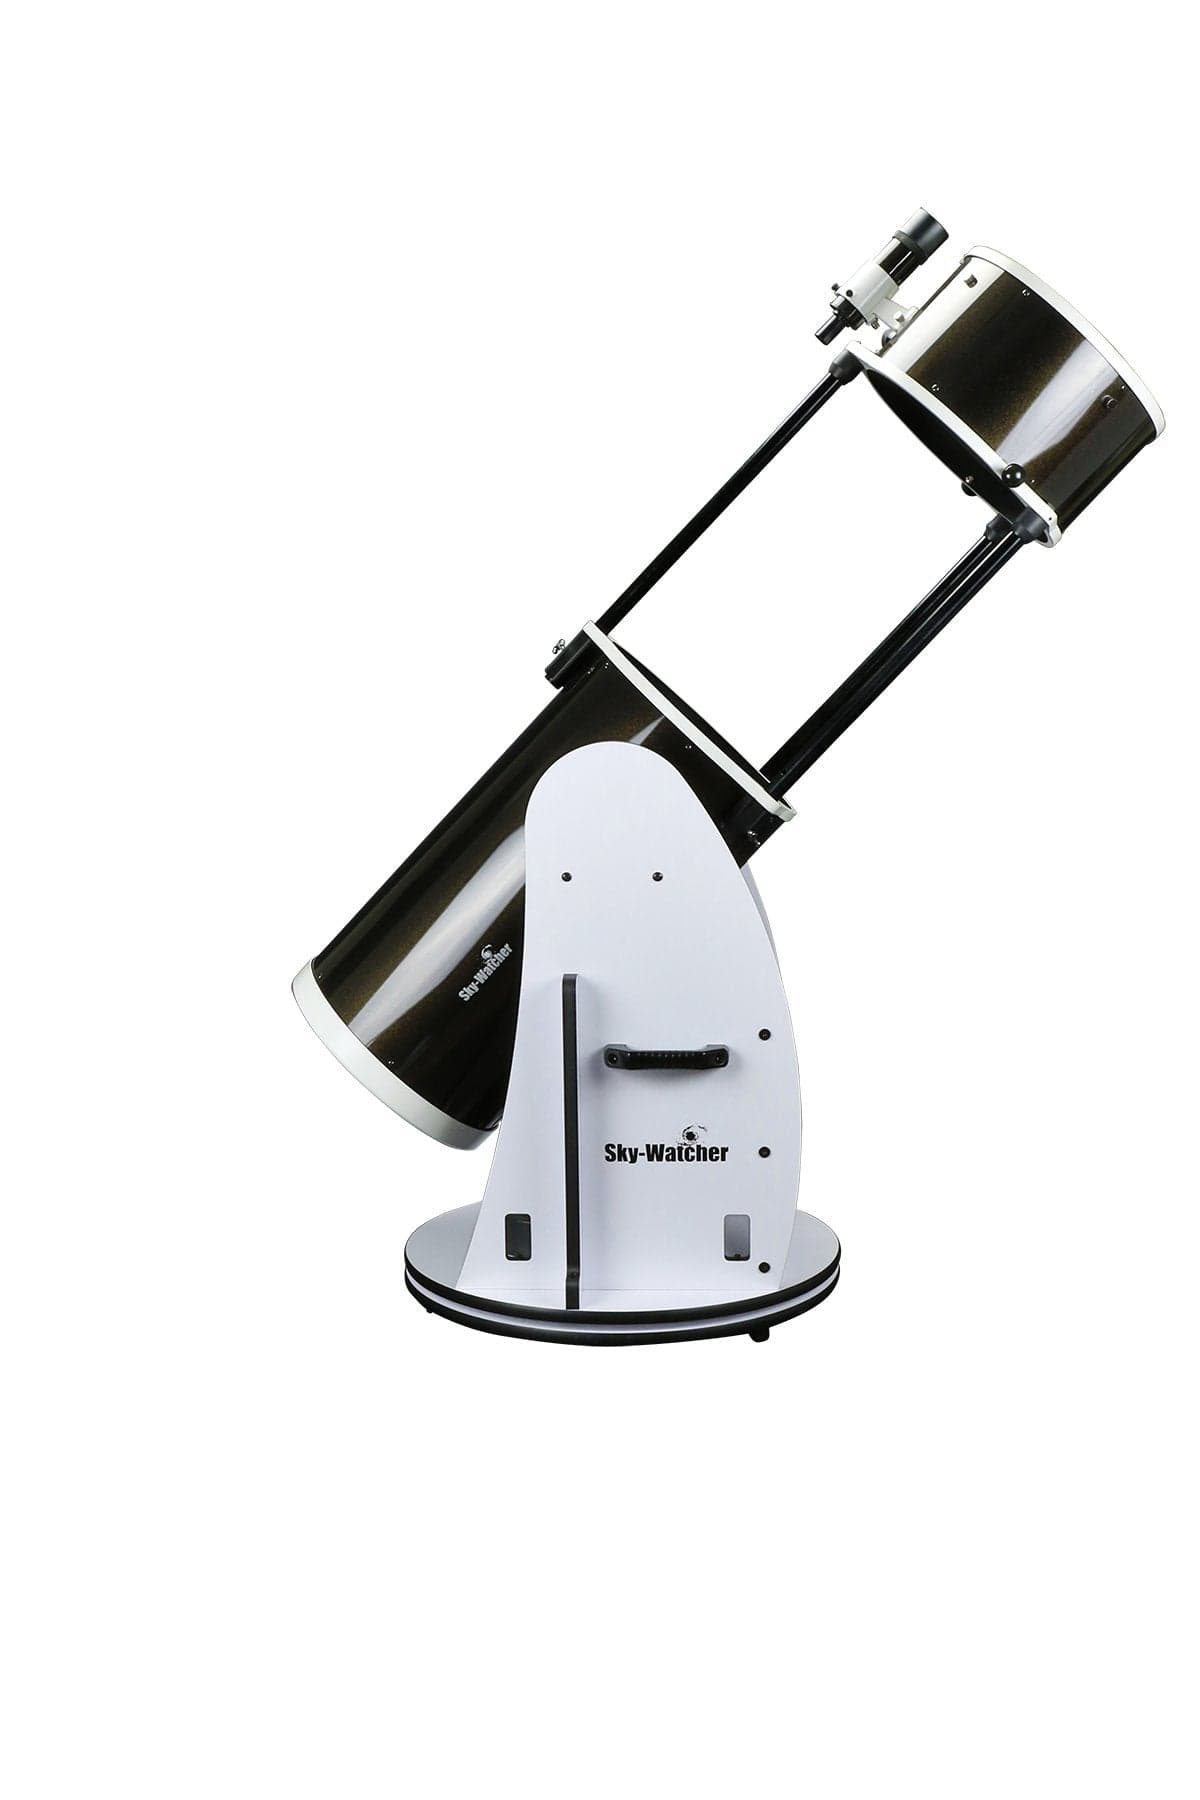 Sky-Watcher Flextube 300P 12 SynScan GoTo Collapsible Dobsonian Telescope (S11820)